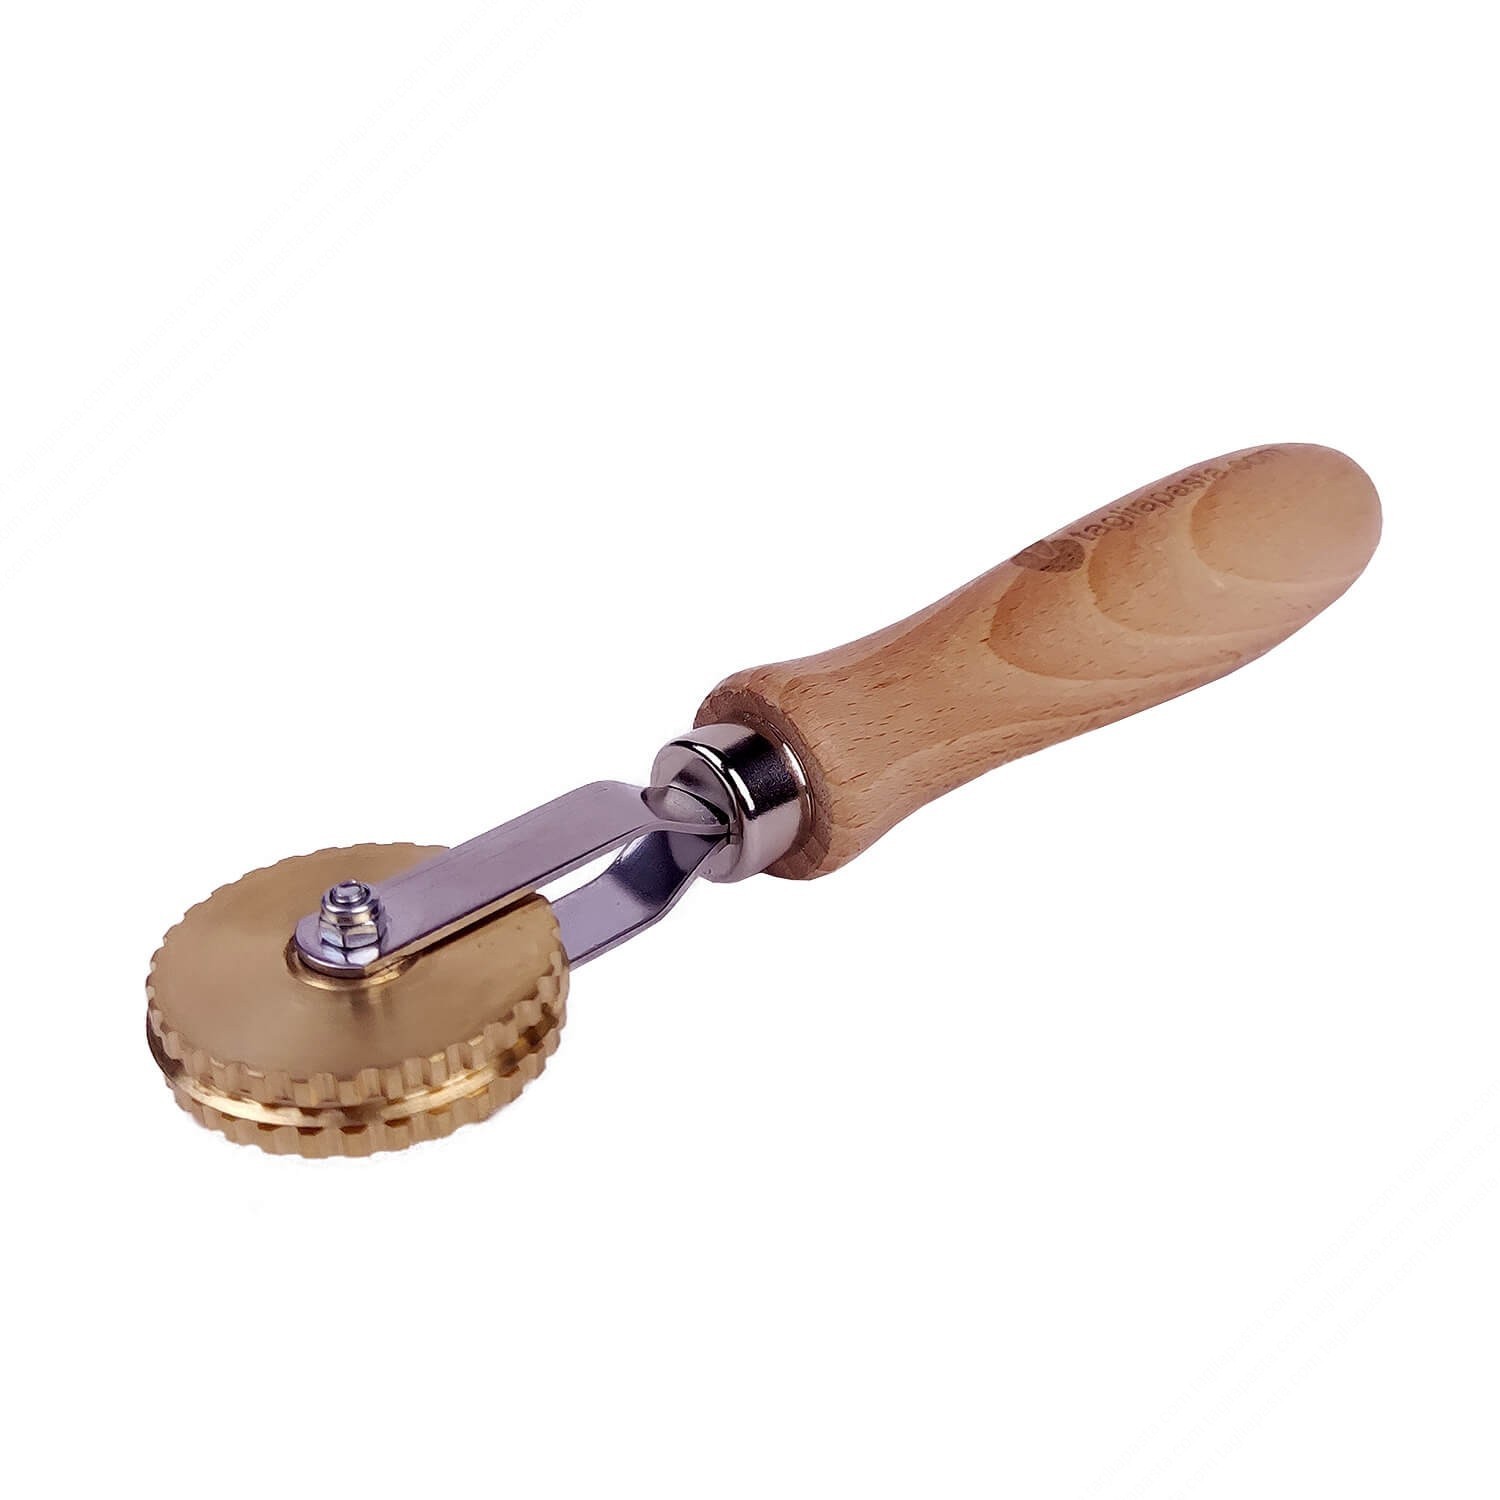 https://www.tagliapasta.com/1275-thickbox_default/brass-rolling-cutter-for-cutting-and-sealing-pasta-with-smooth-blade-width-9mm.jpg